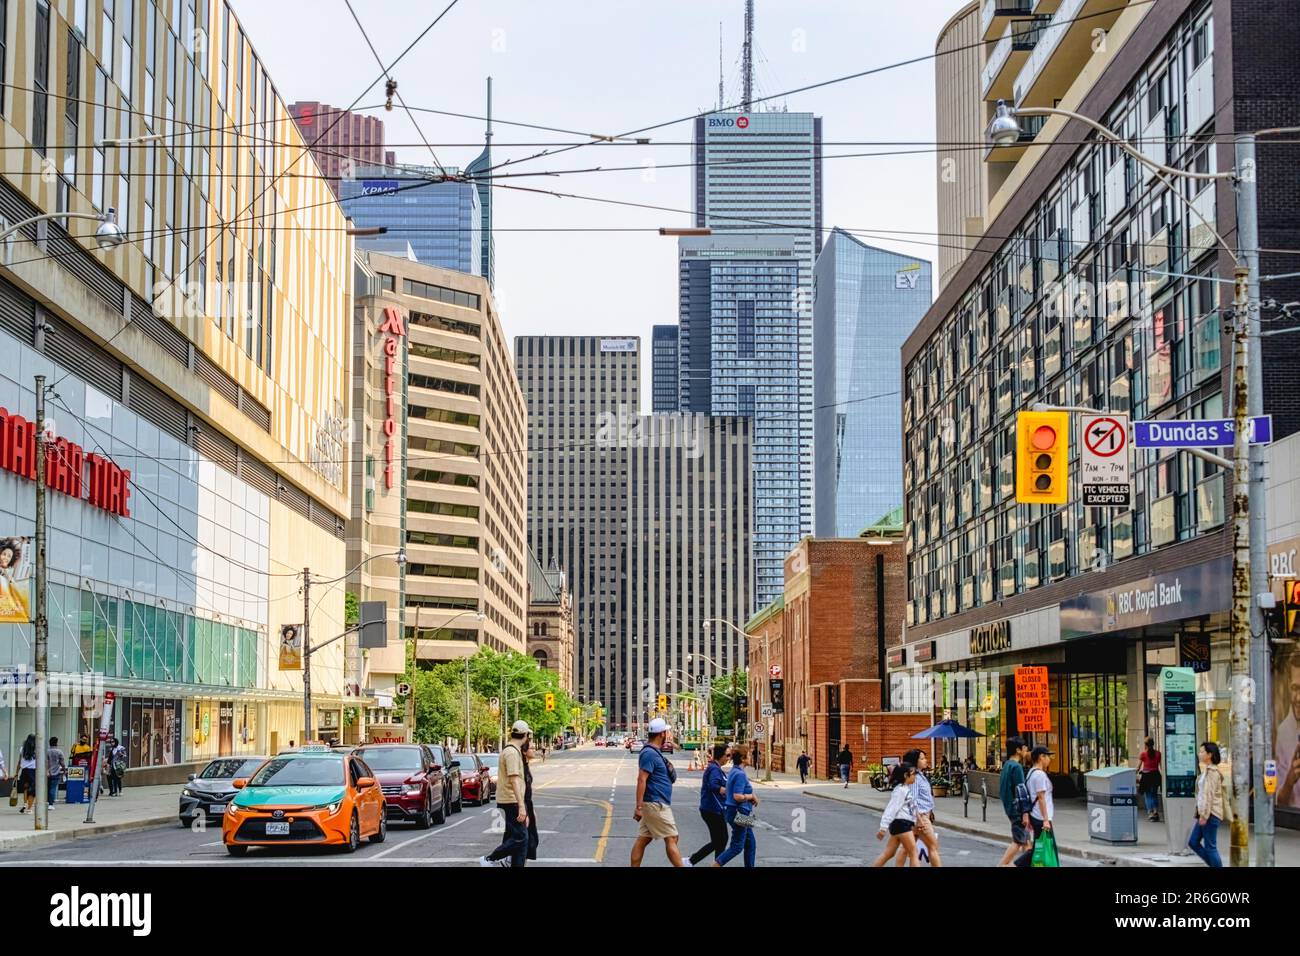 Toronto, Canada - June 4, 2023: Pedestrians crossing Dundas Street W. Cars wait for the people to cross. Stock Photo